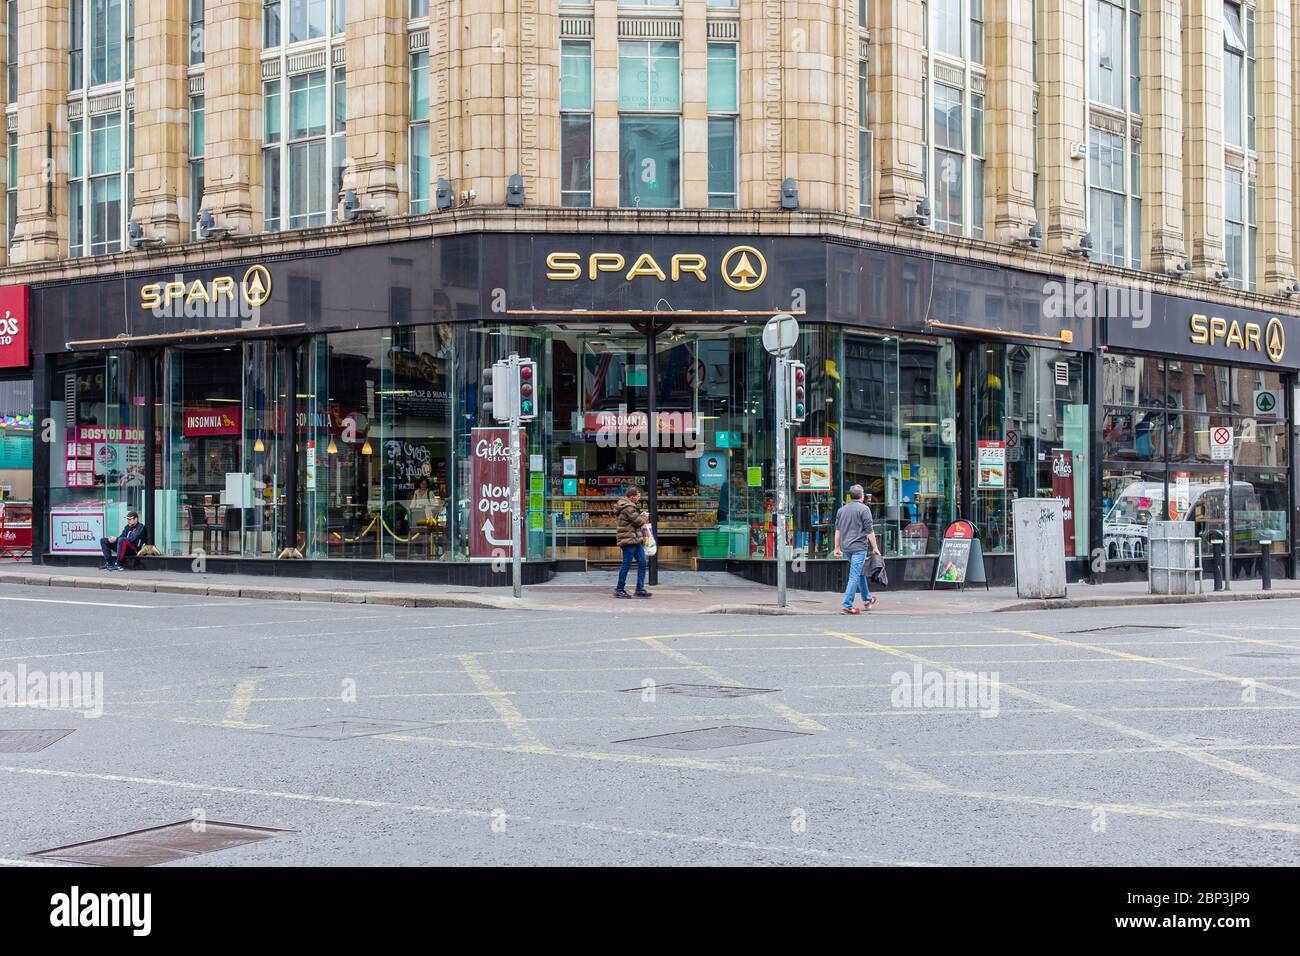 Dublin, Ireland. May 2020. Spar store on a quiet Dame Street as the city experience limited footfall and traffic due to Covid-19 pandemic restrictions Stock Photo